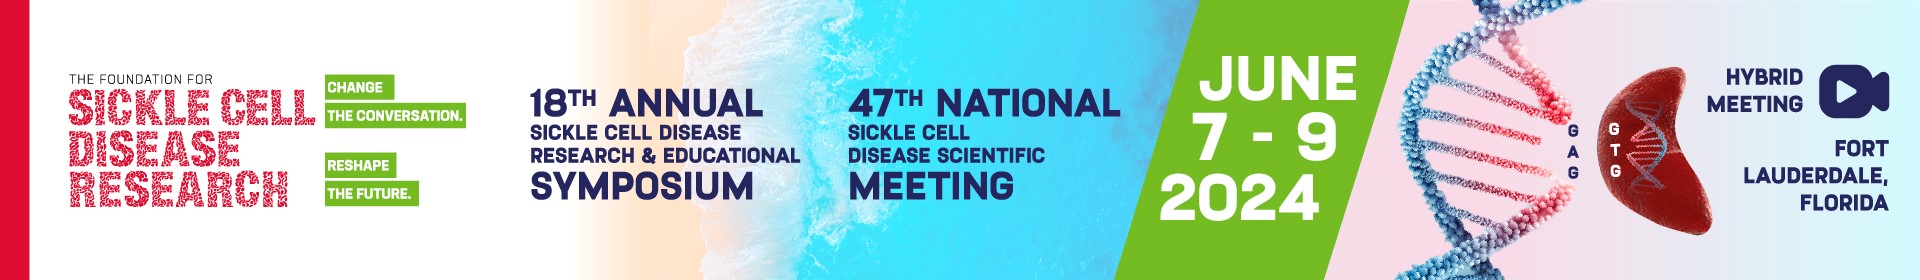 18th Annual Research Symposium & 47th Annual Scientific Meeting - Organized by the Foundation for Sickle Cell Disease Research Event Banner